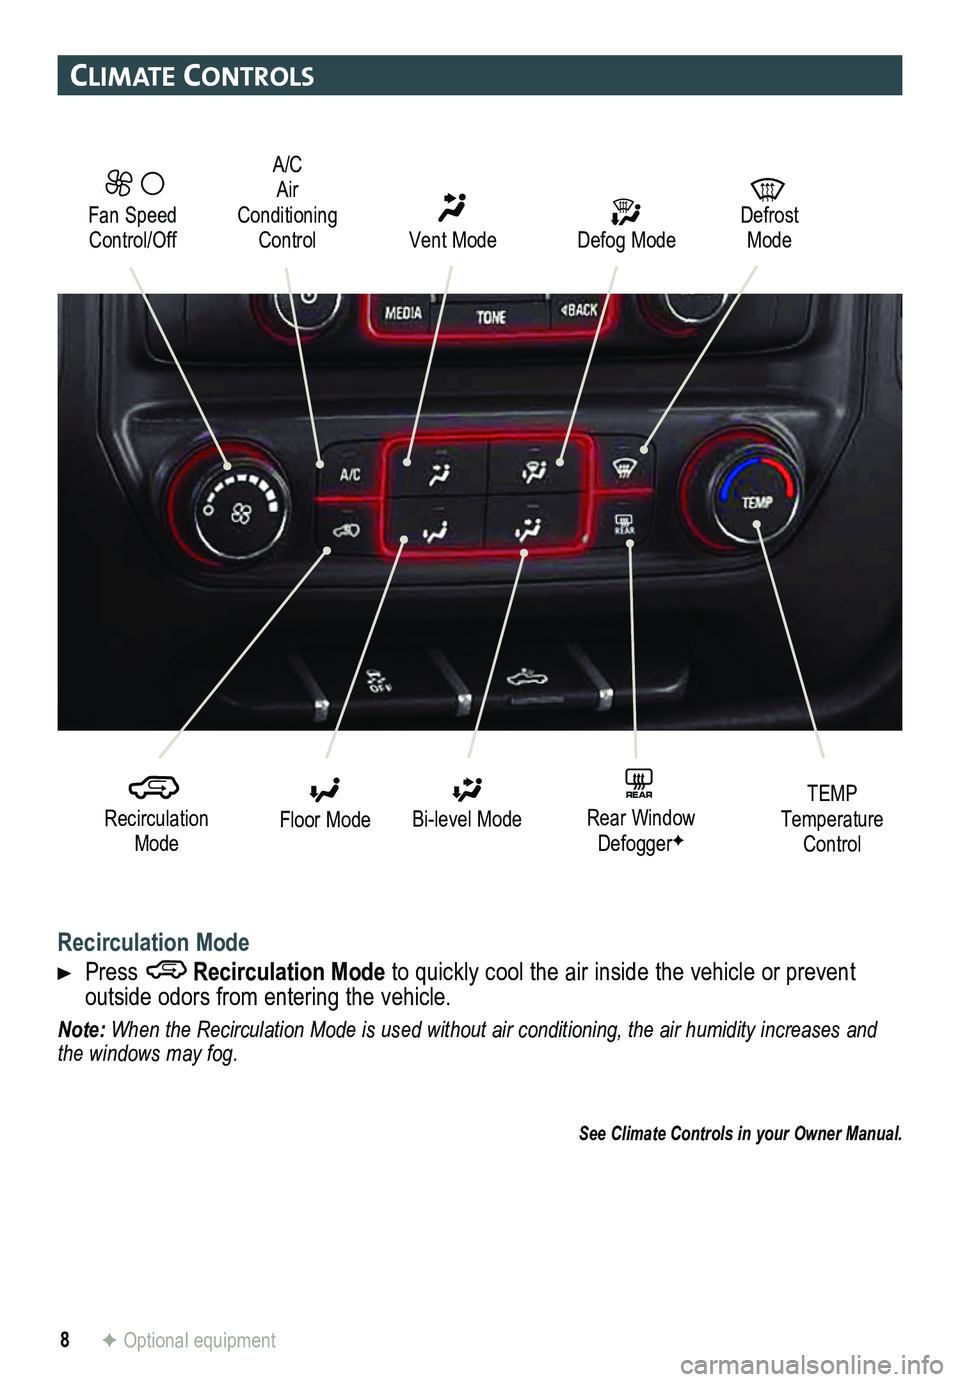 GMC SIERRA 2015  Get To Know Guide 8
clImate controls
Recirculation Mode
 Press Recirculation Mode to quickly cool the air inside the vehicle or prevent  
outside odors from entering the vehicle. 
Note: When the Recirculation Mode is u